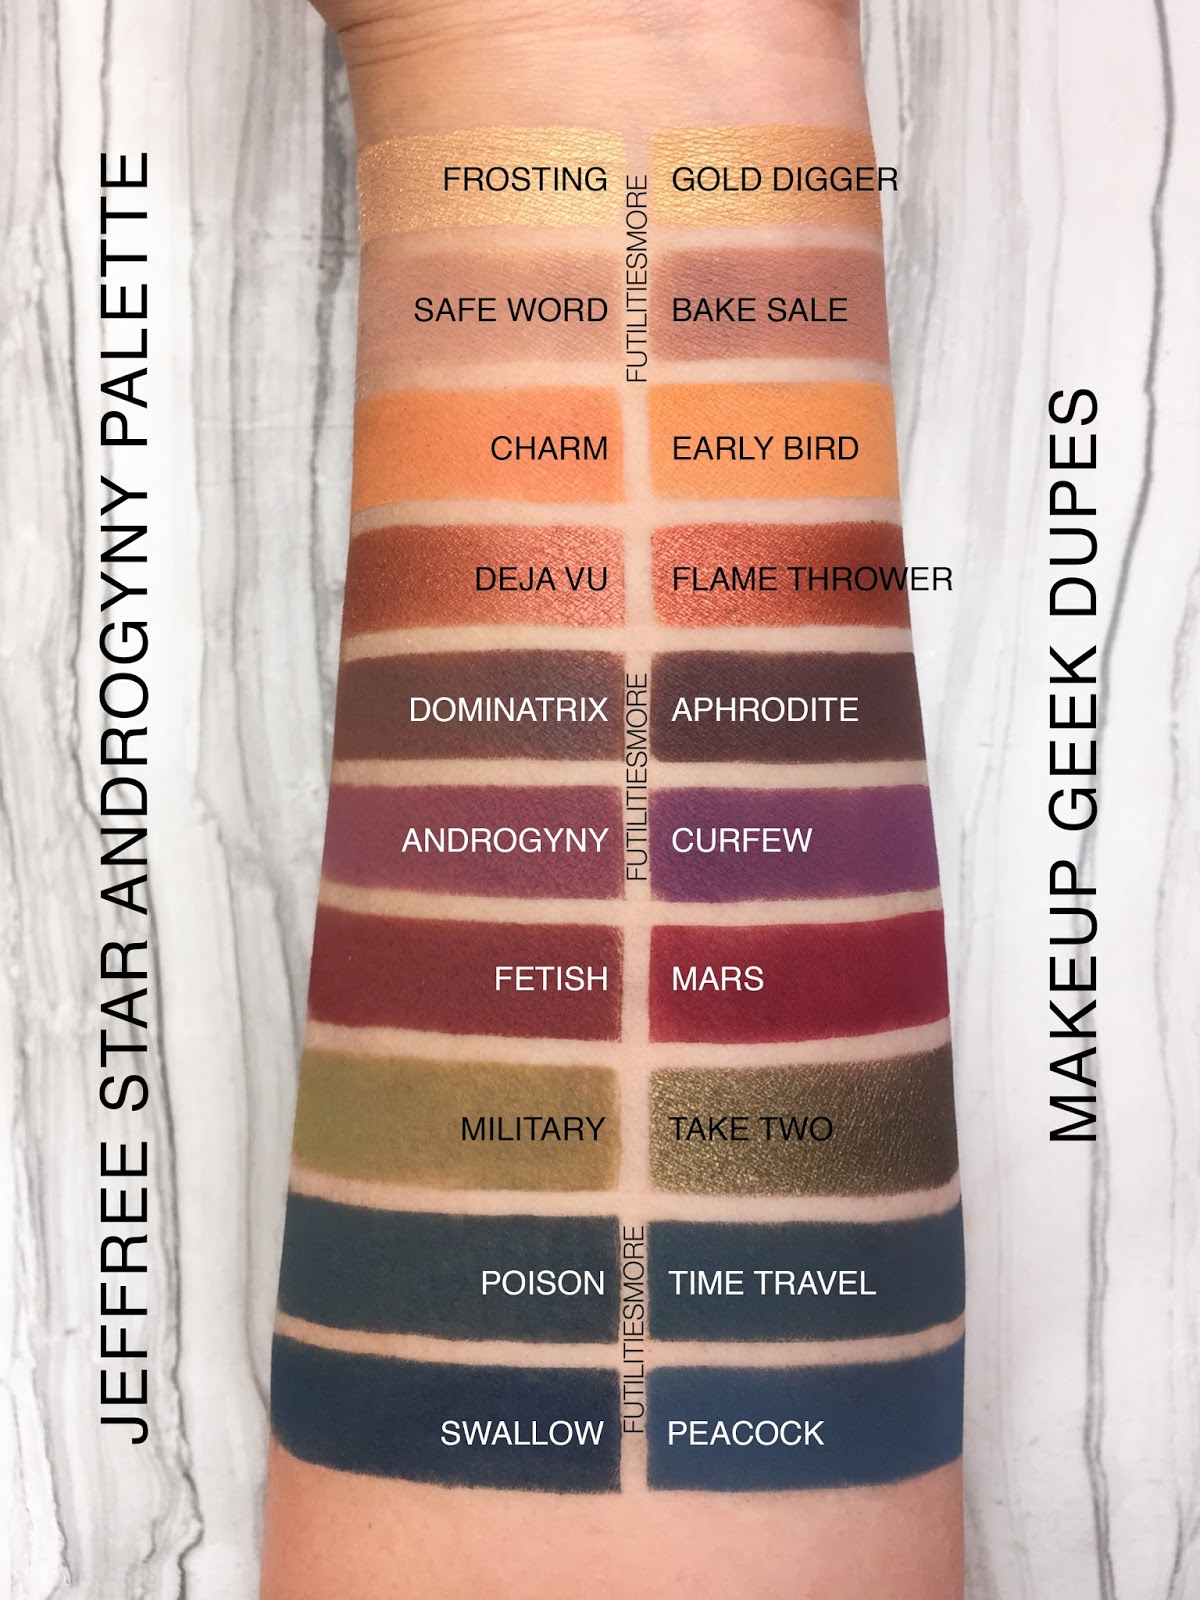 JEFFREE STAR ANDROGYNY DUPES WITH MAKEUP GEEK EYESHADOWS1200 x 1600